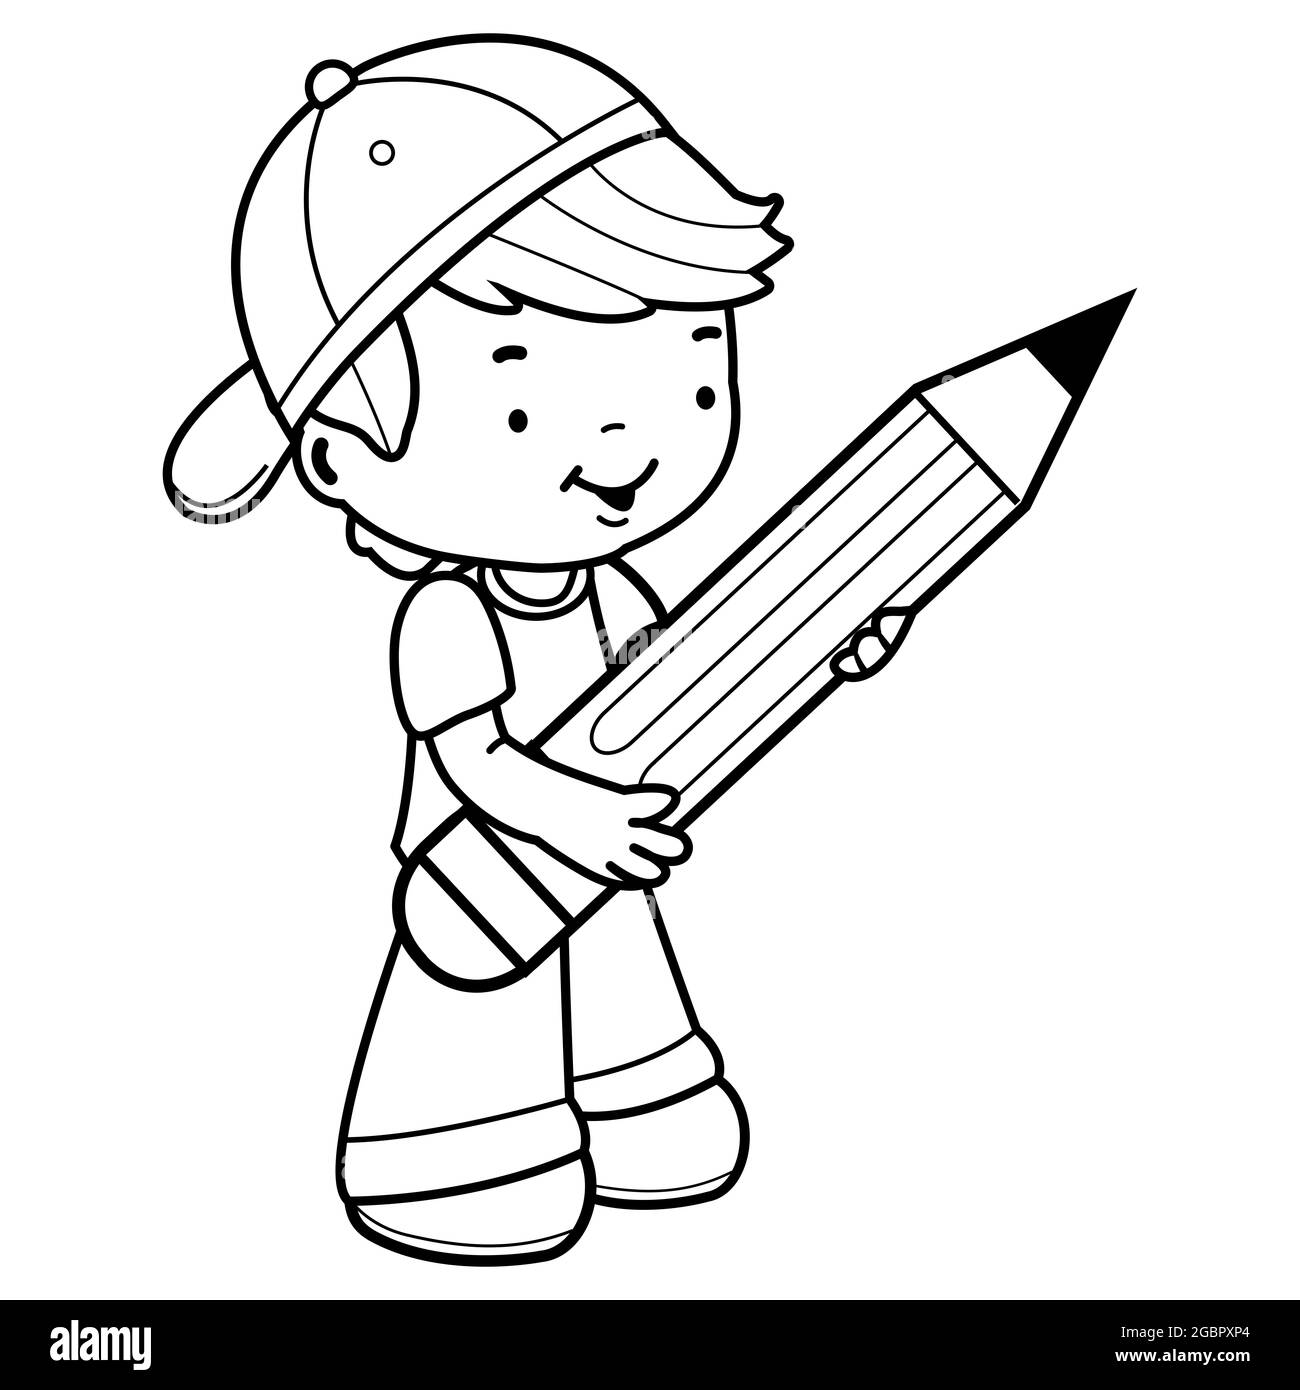 Coloring crayons Black and White Stock Photos & Images - Alamy